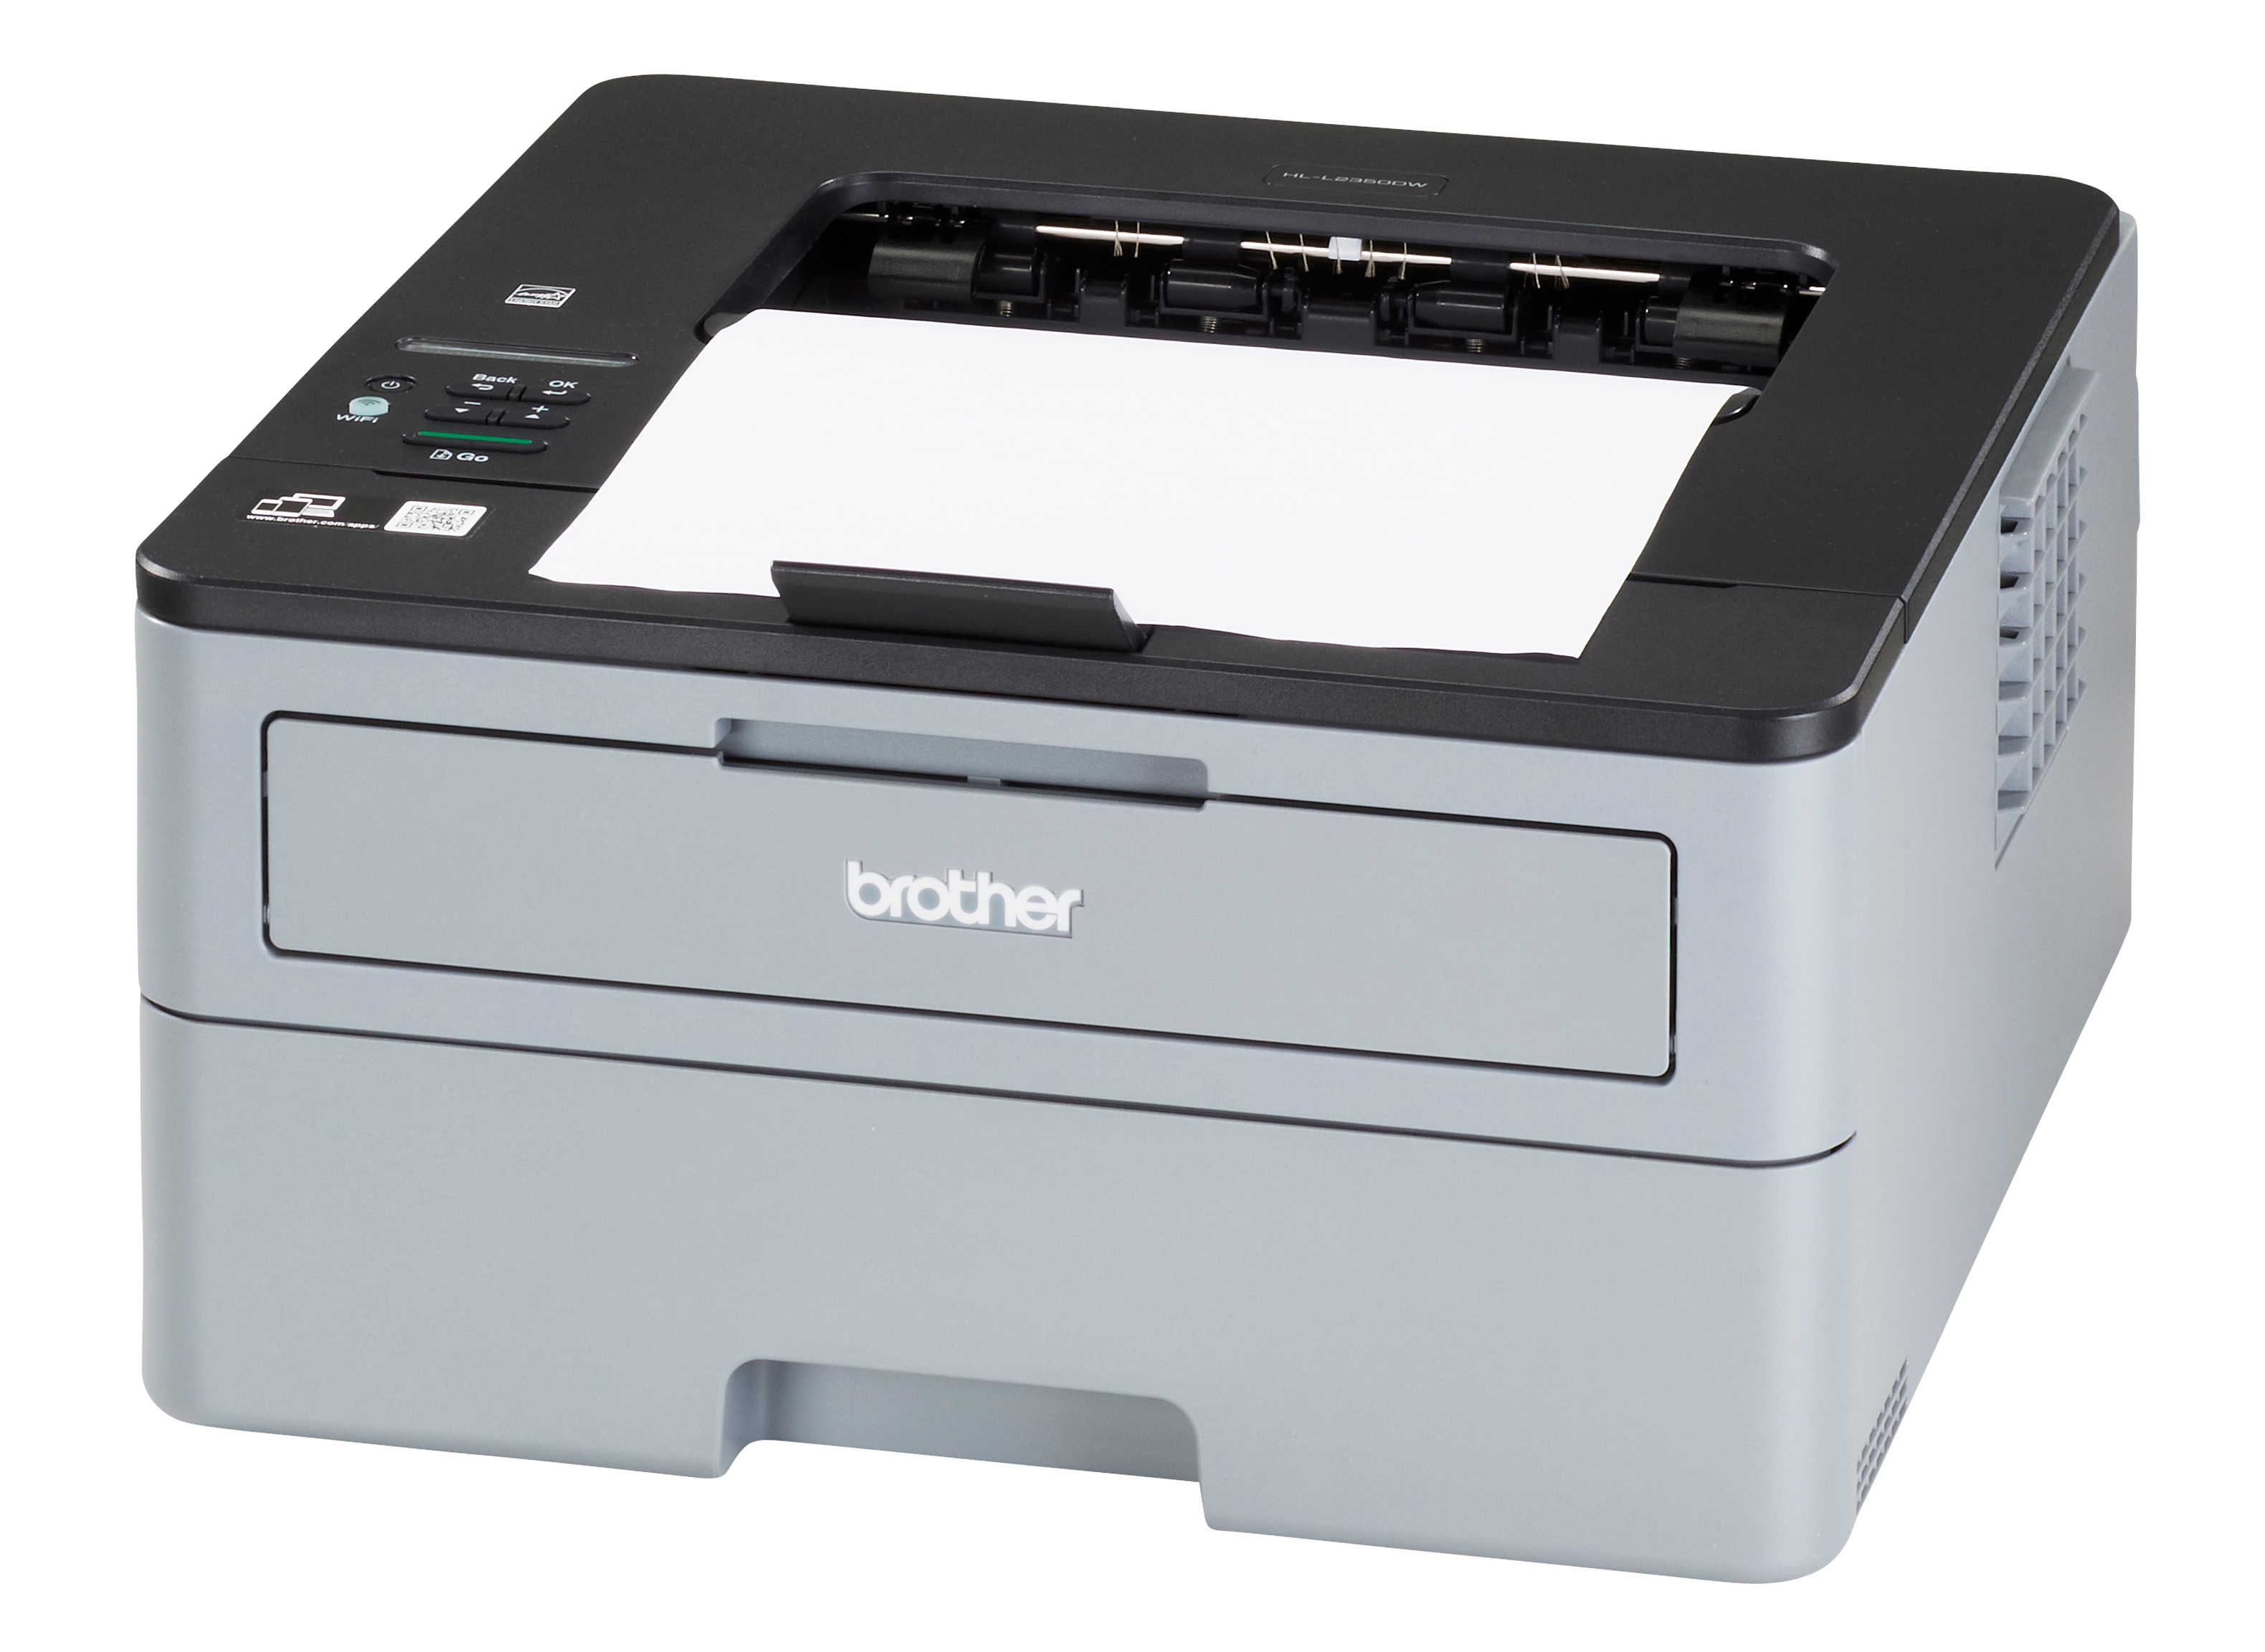 Brother HL-L2350DW Printer Review - Reports